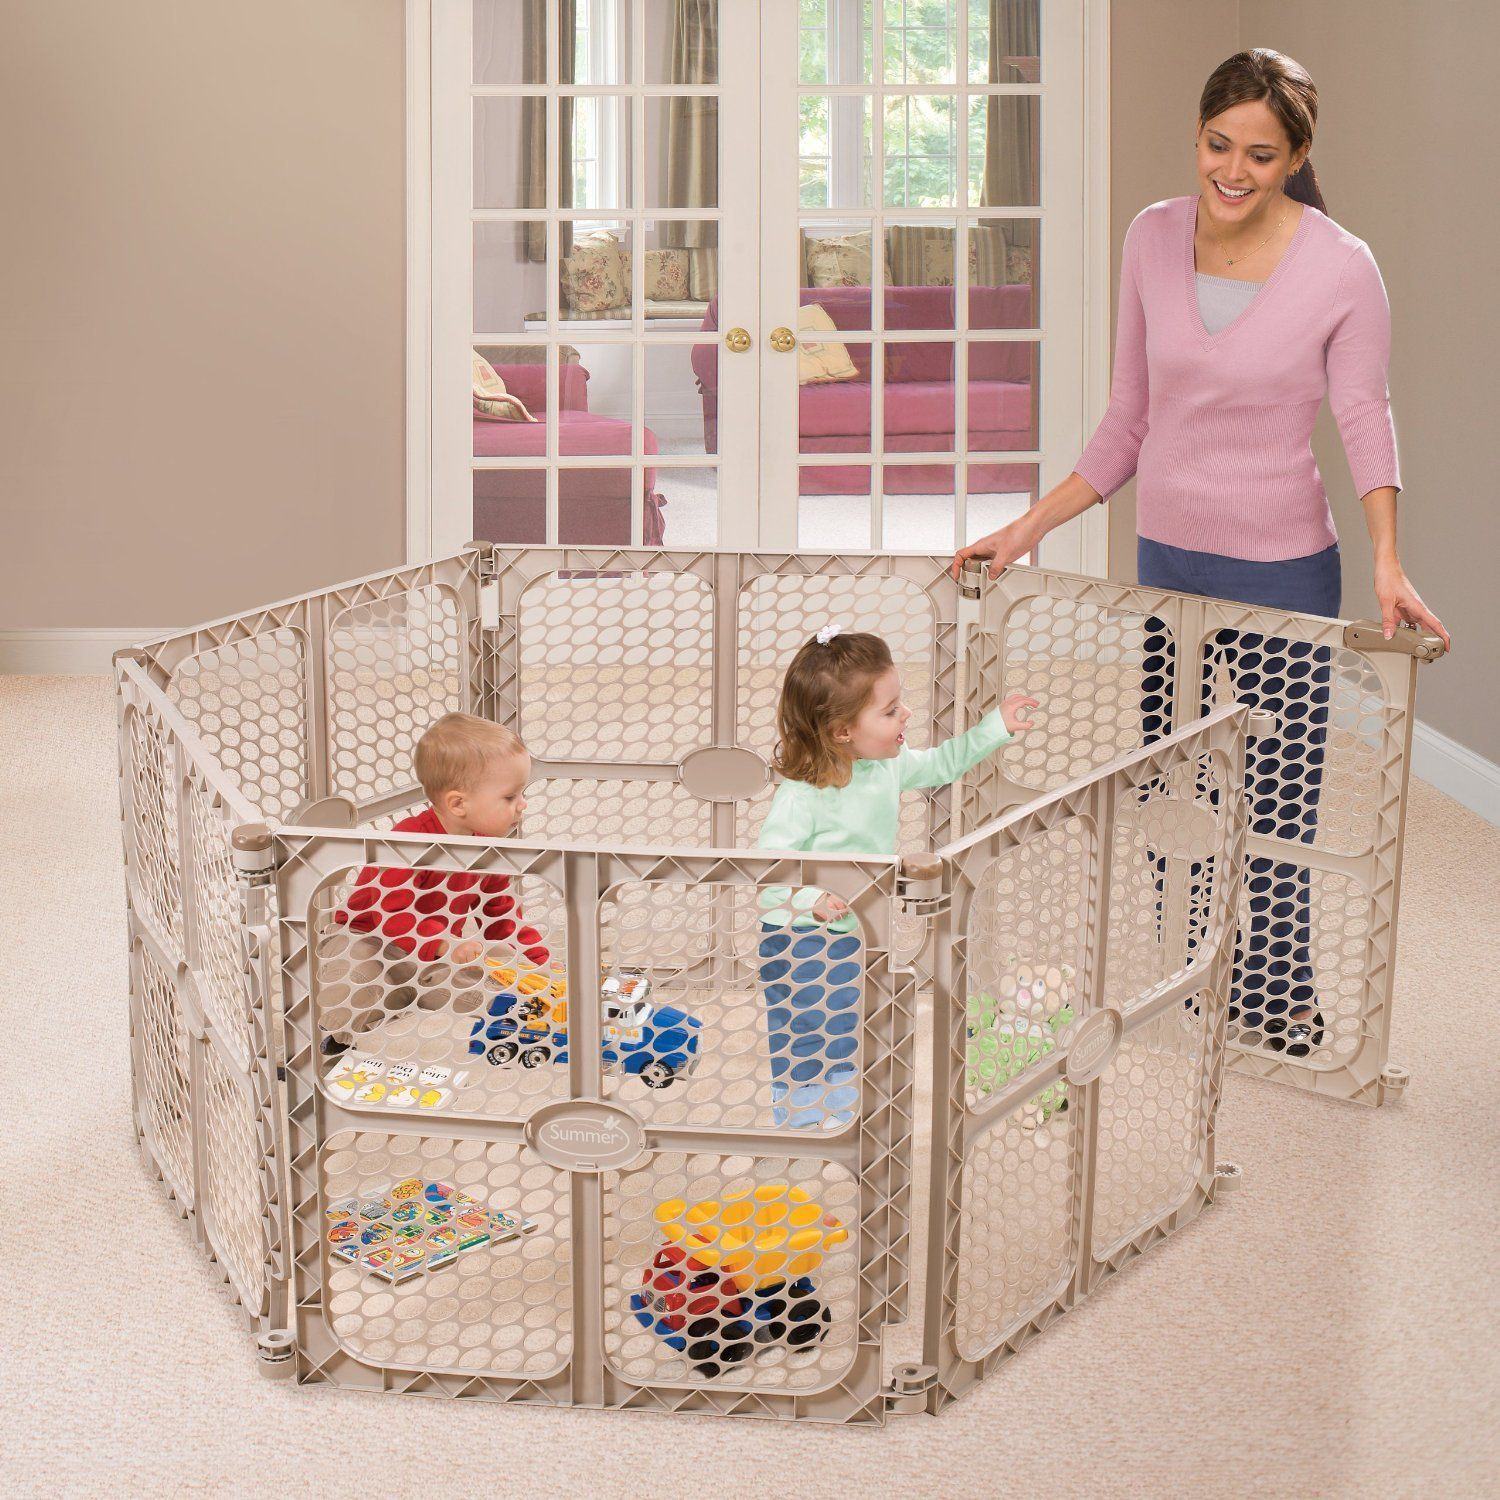 Outdoor Kids Gate
 he Summer Infant Secure Surround gate is a convenient way